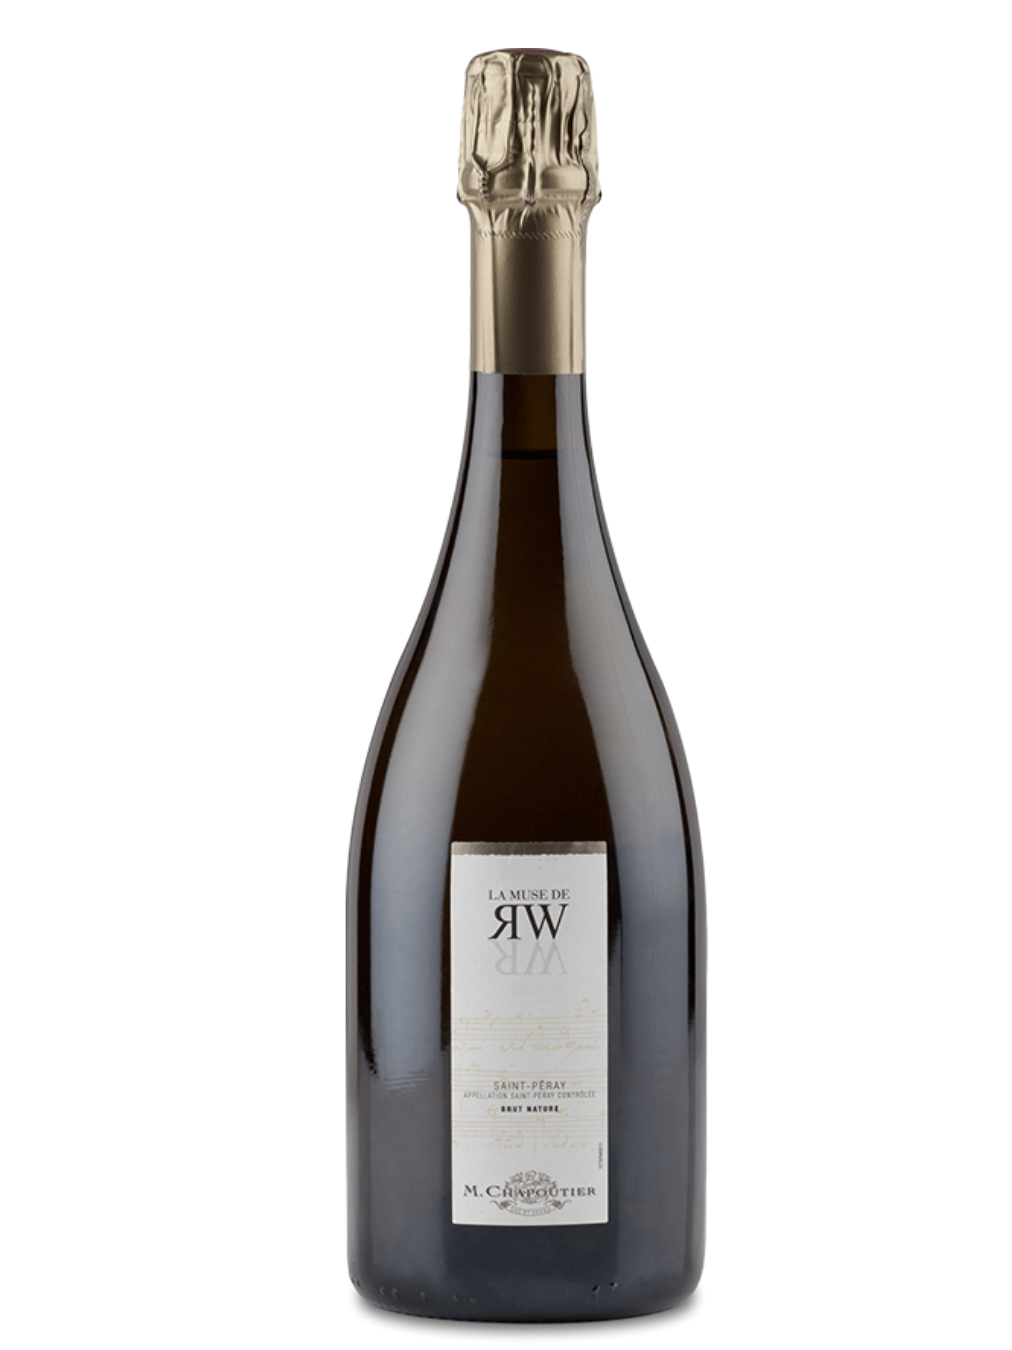 Shop Maison M. Chapoutier Maison M. Chapoutier St. Peray La Muse de RW Brut Nature 2014 online at PENTICTON artisanal French wine store in Hong Kong. Discover other French wines, promotions, workshops and featured offers at pentictonpacific.com 